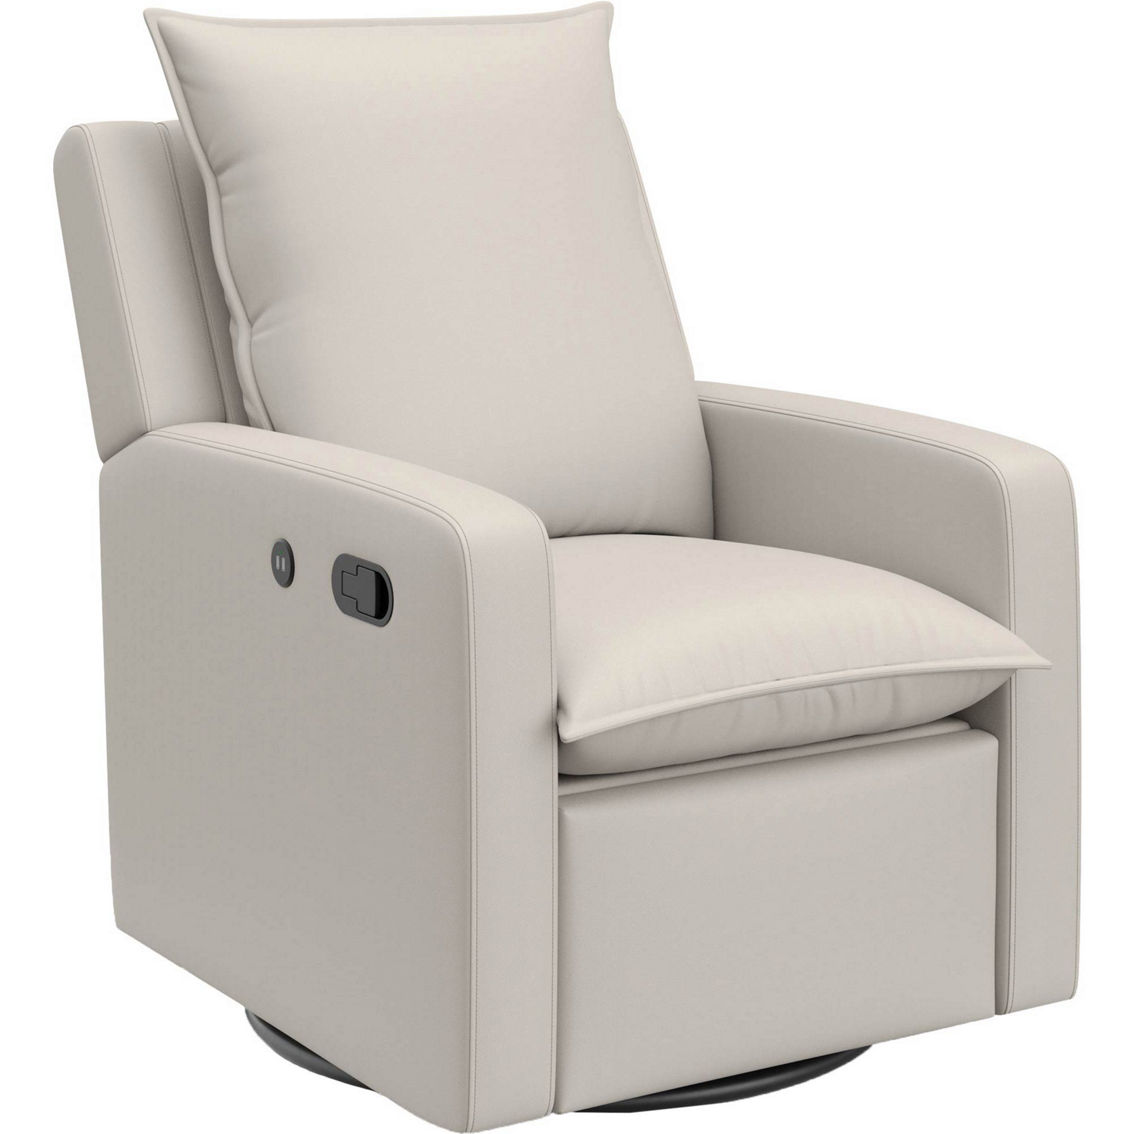 Storkcraft Timeless Recline Glider With USB - Image 1 of 9